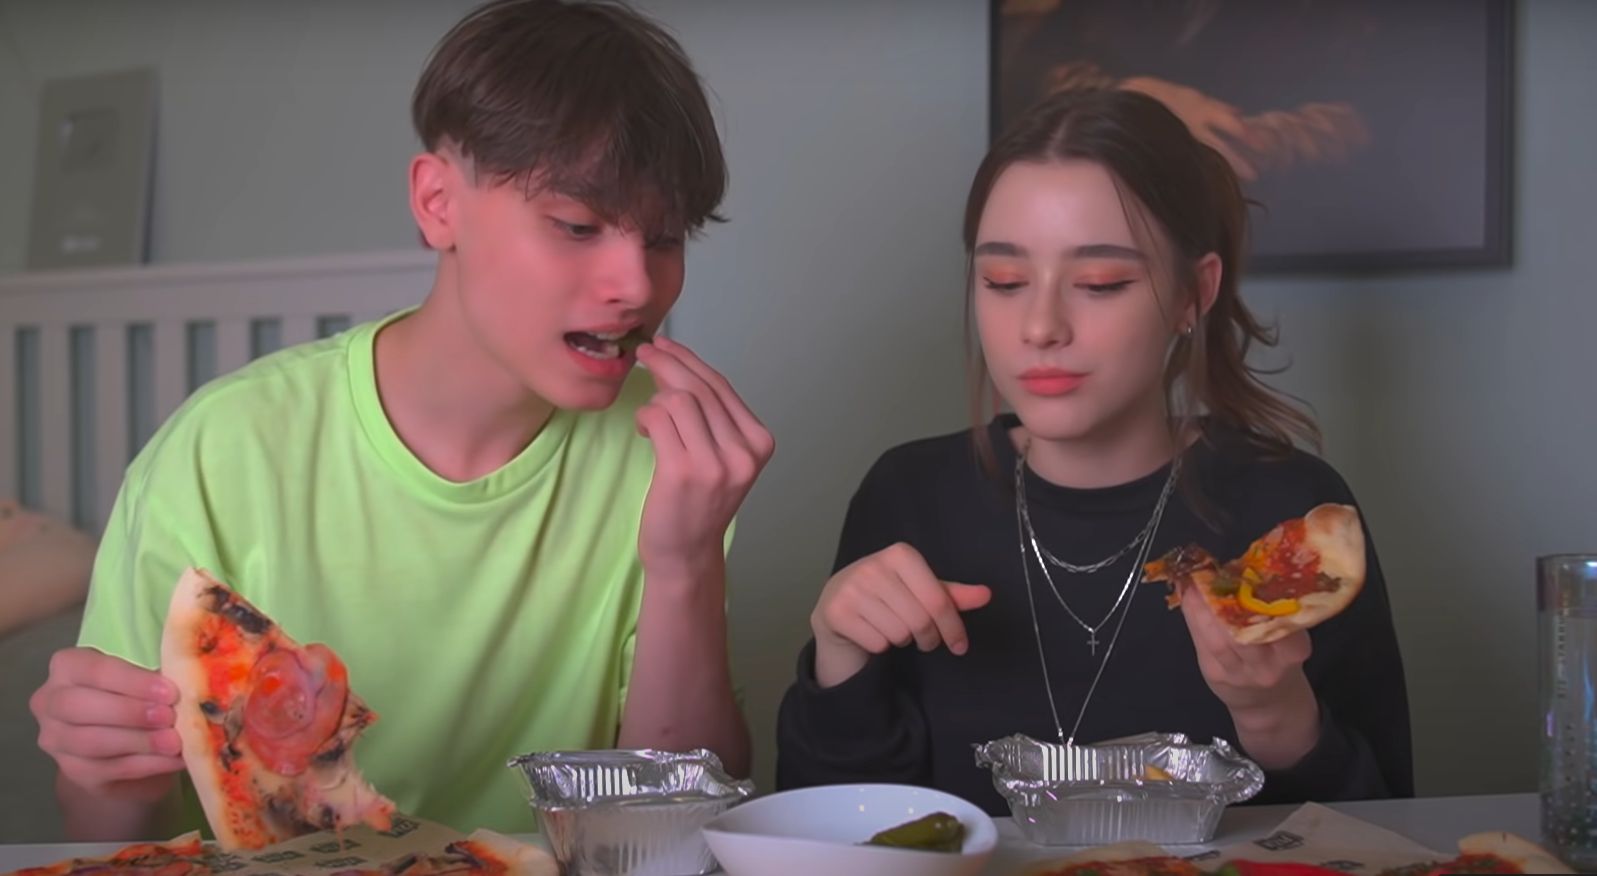 Dasha and her brother Stephan in a Mukbang video